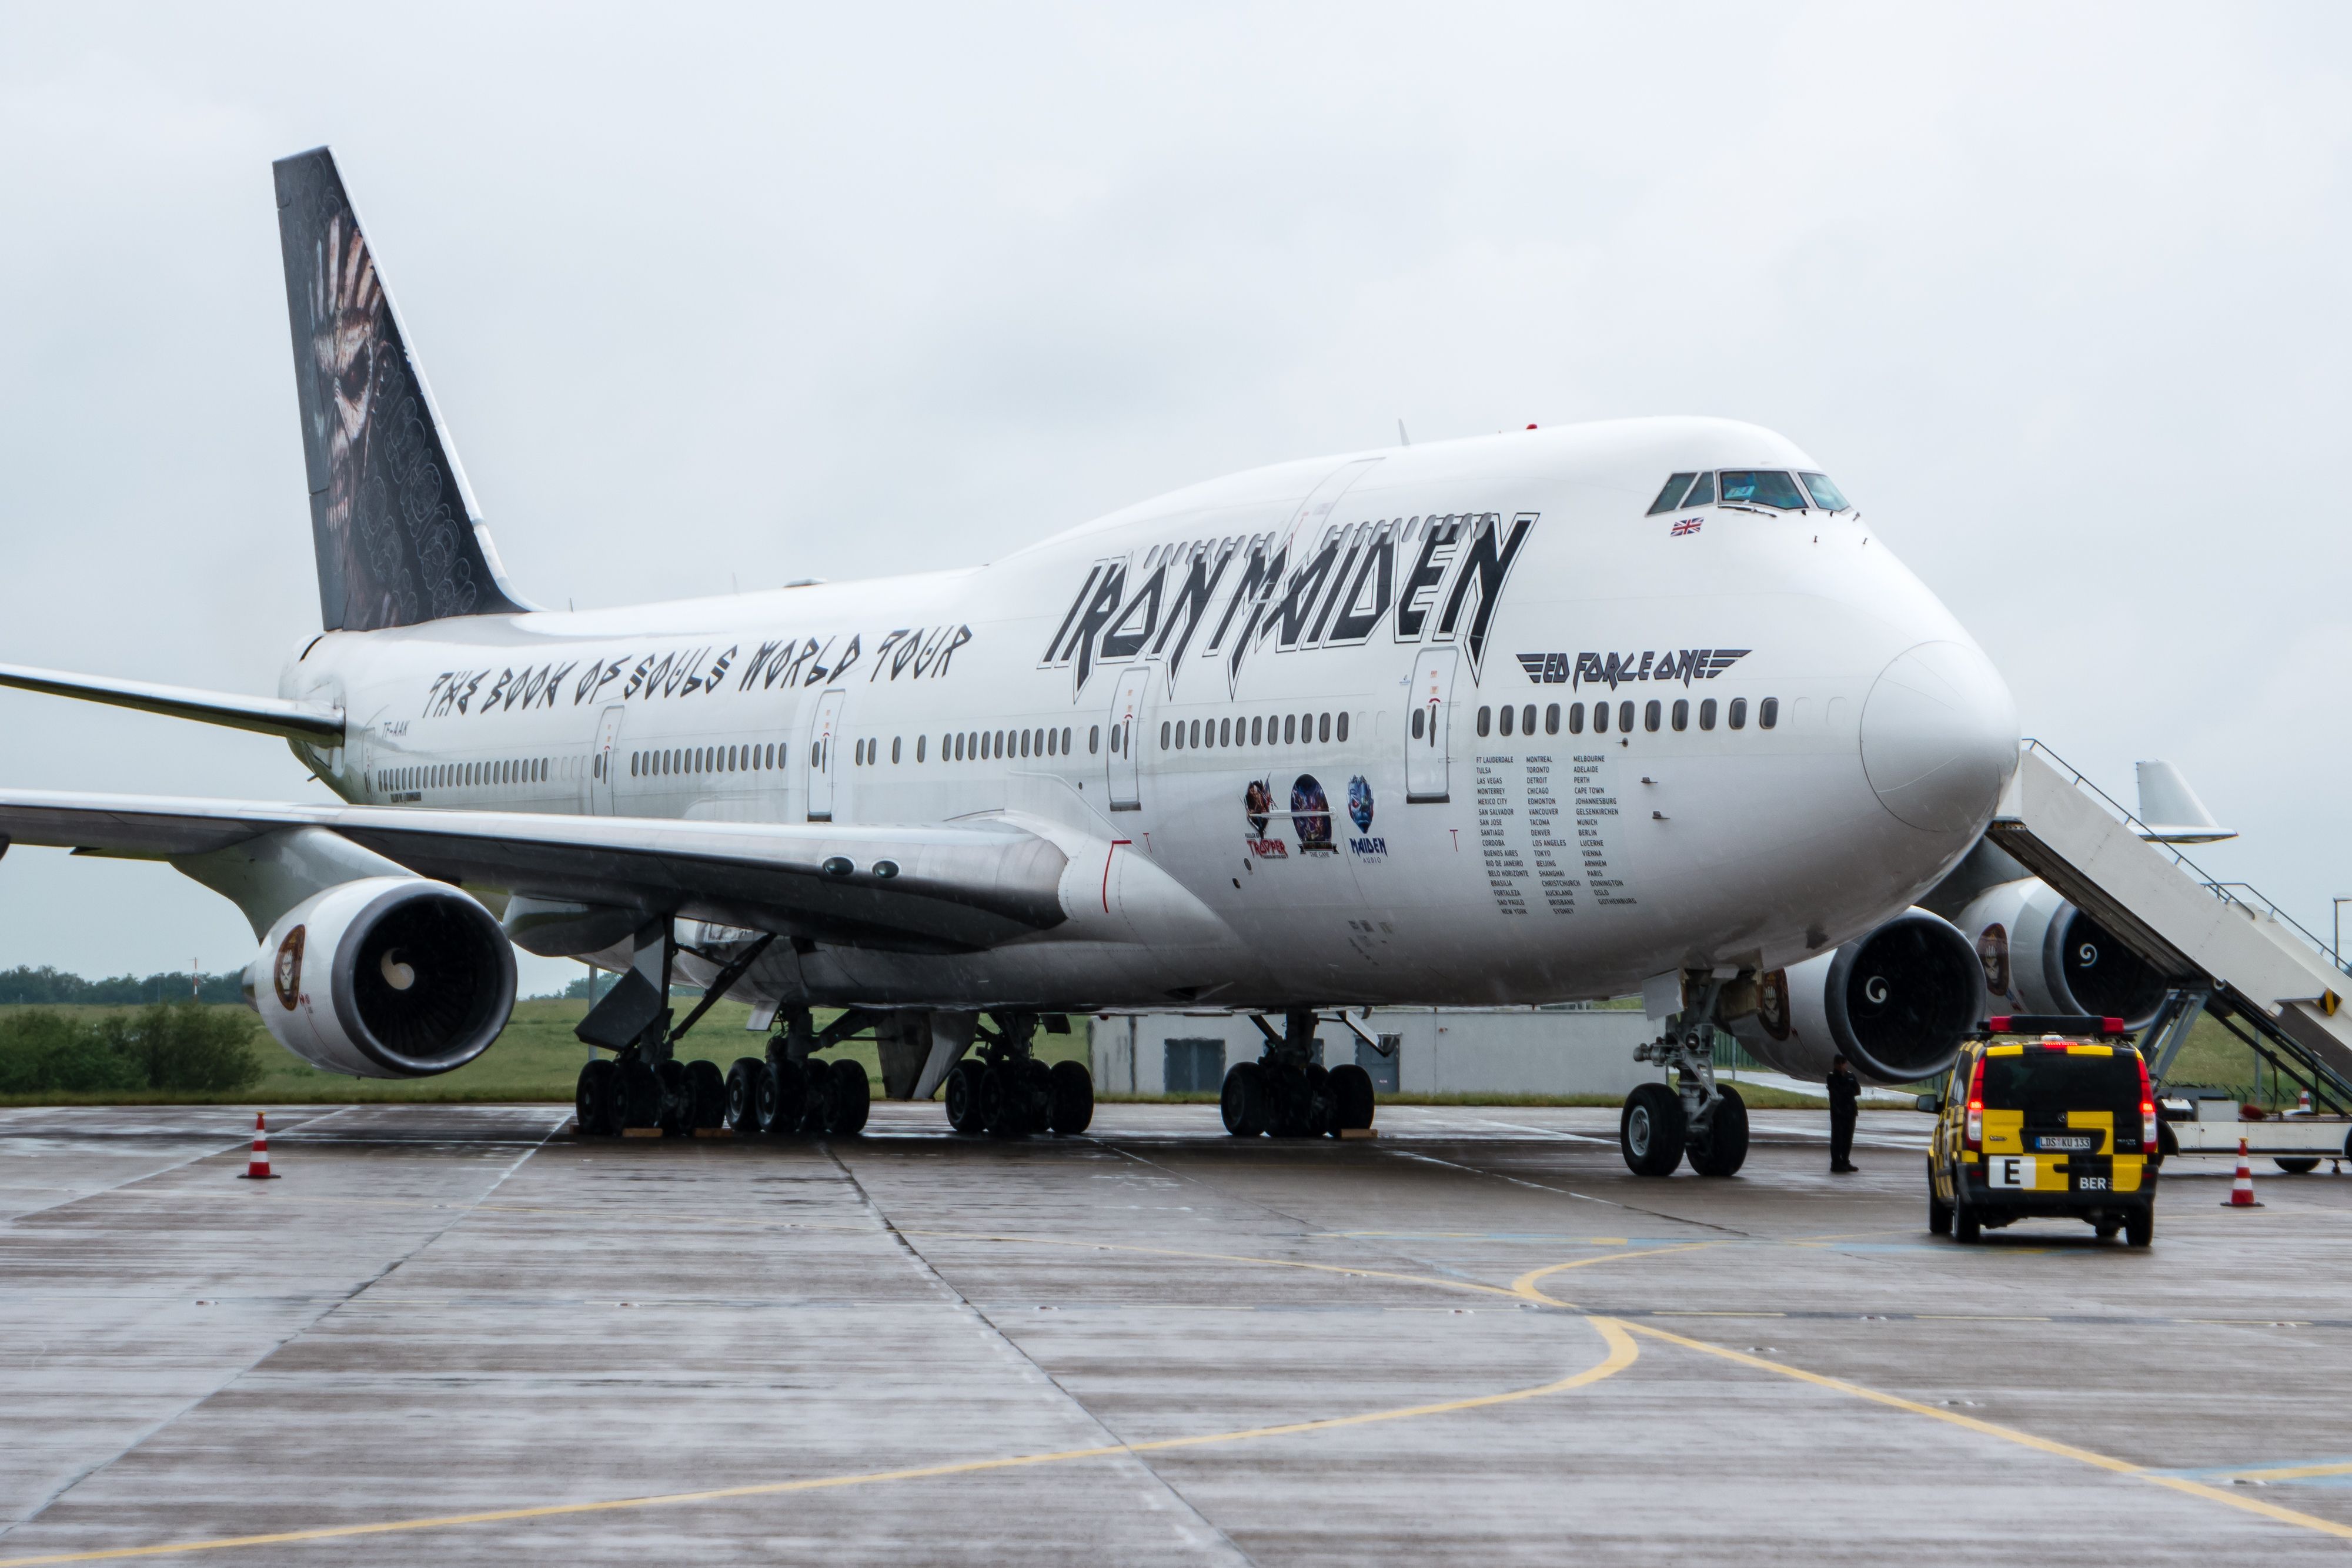 Iron Maiden's Boeing 747 Ed Force One parked at an airport.